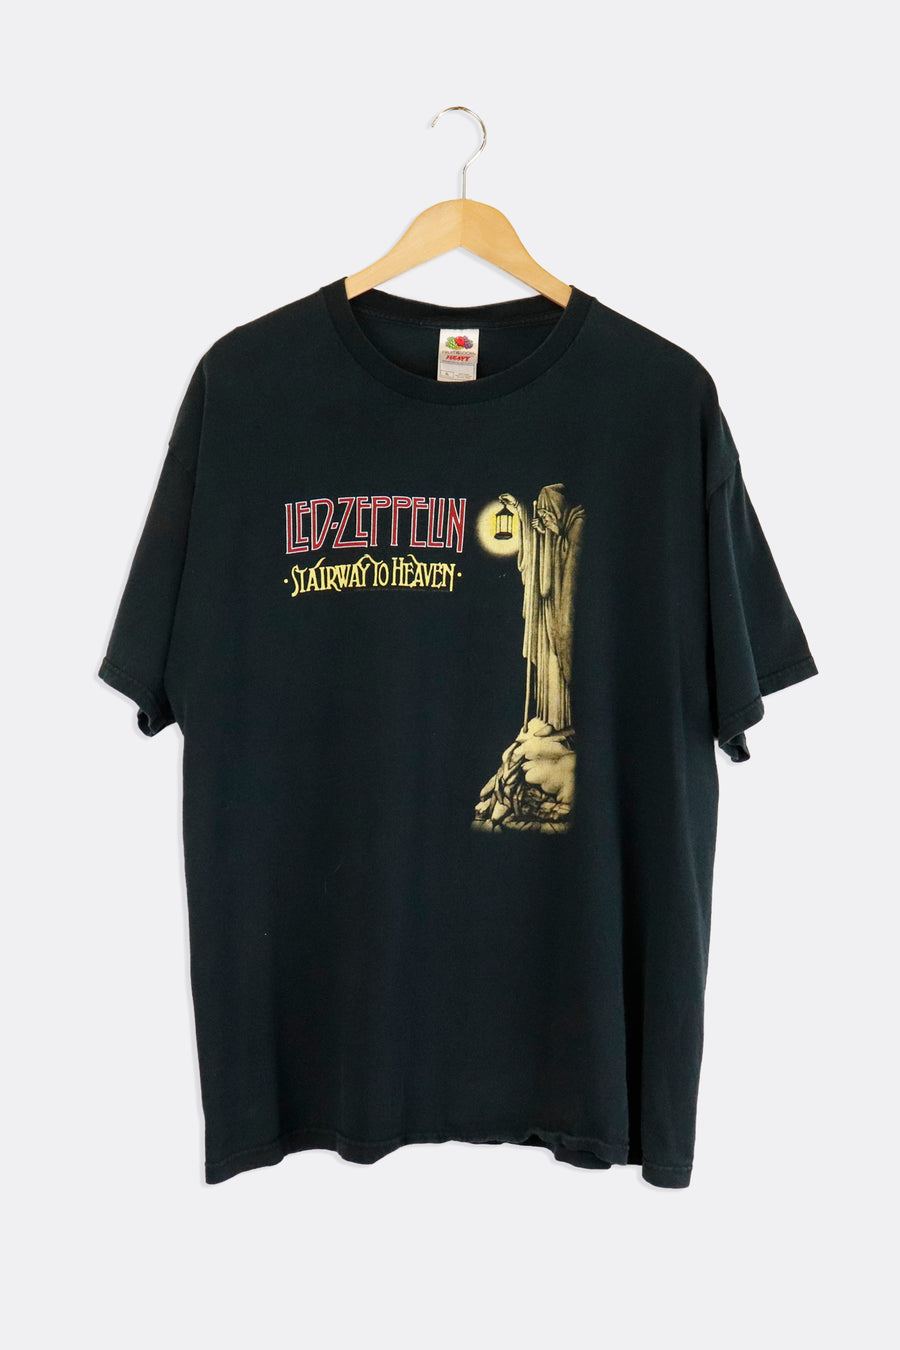 Vintage 2005 Led Zeppelin Stairway To Heaven Song Lyrics On Back Album Cover On Front Vinyl T Shirt Size XL